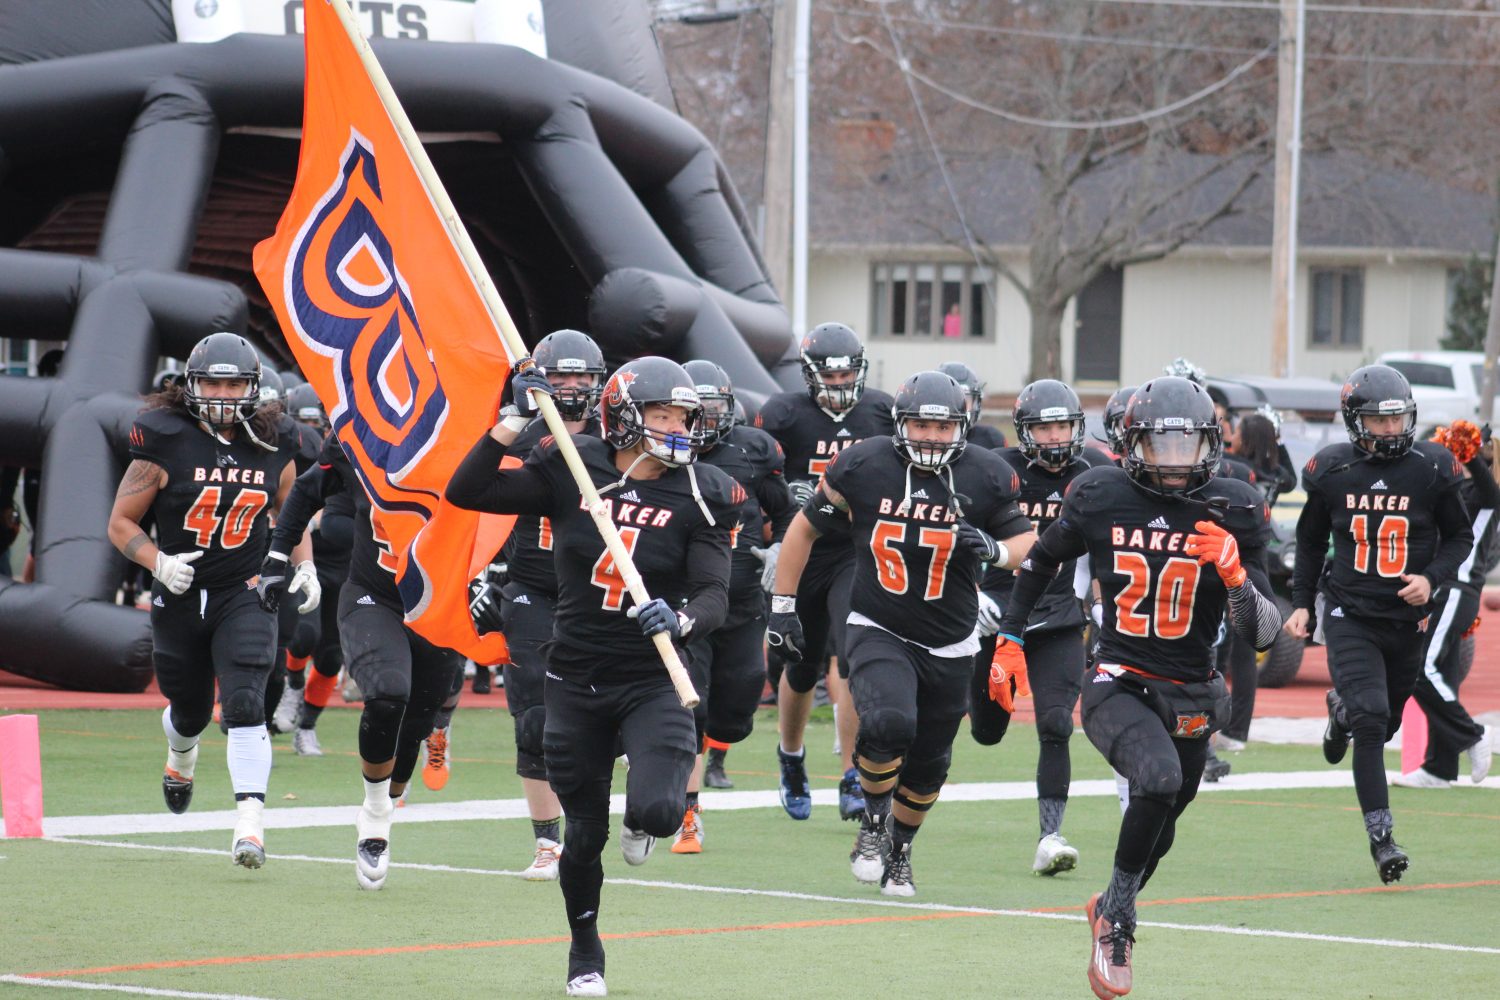 Baker takes the field before its first NAIA-FCS semifinals since 1993. The Wildcats beat Eastern Oregon 45-41 and advanced to their first title game since 1986. Image by Shelby Stephens.